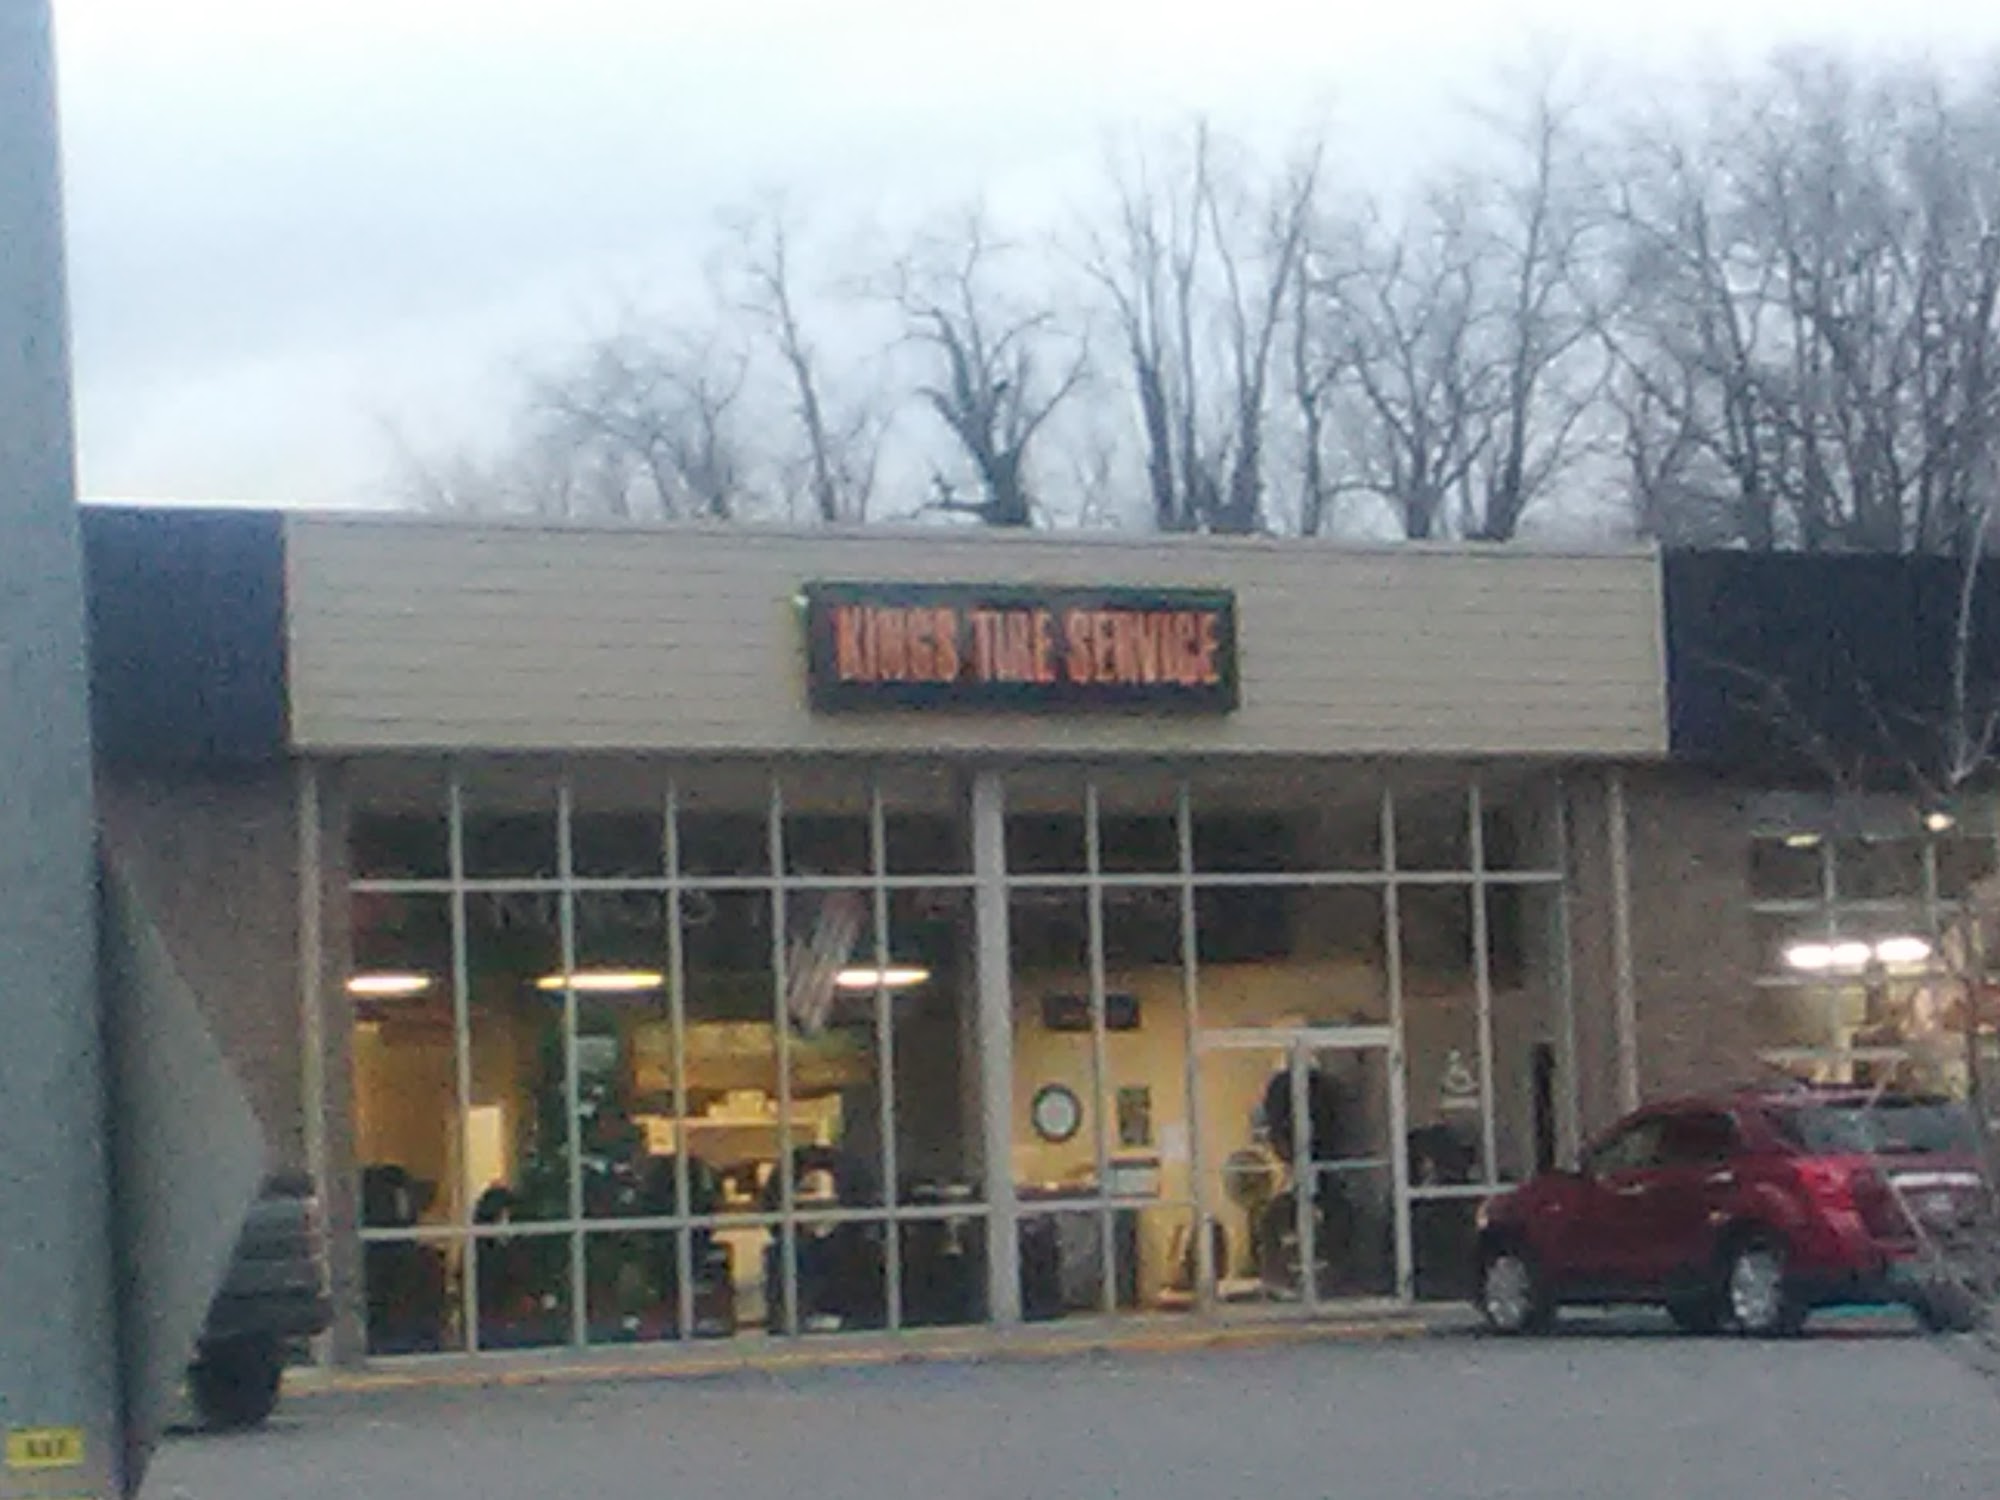 King's Tire Service